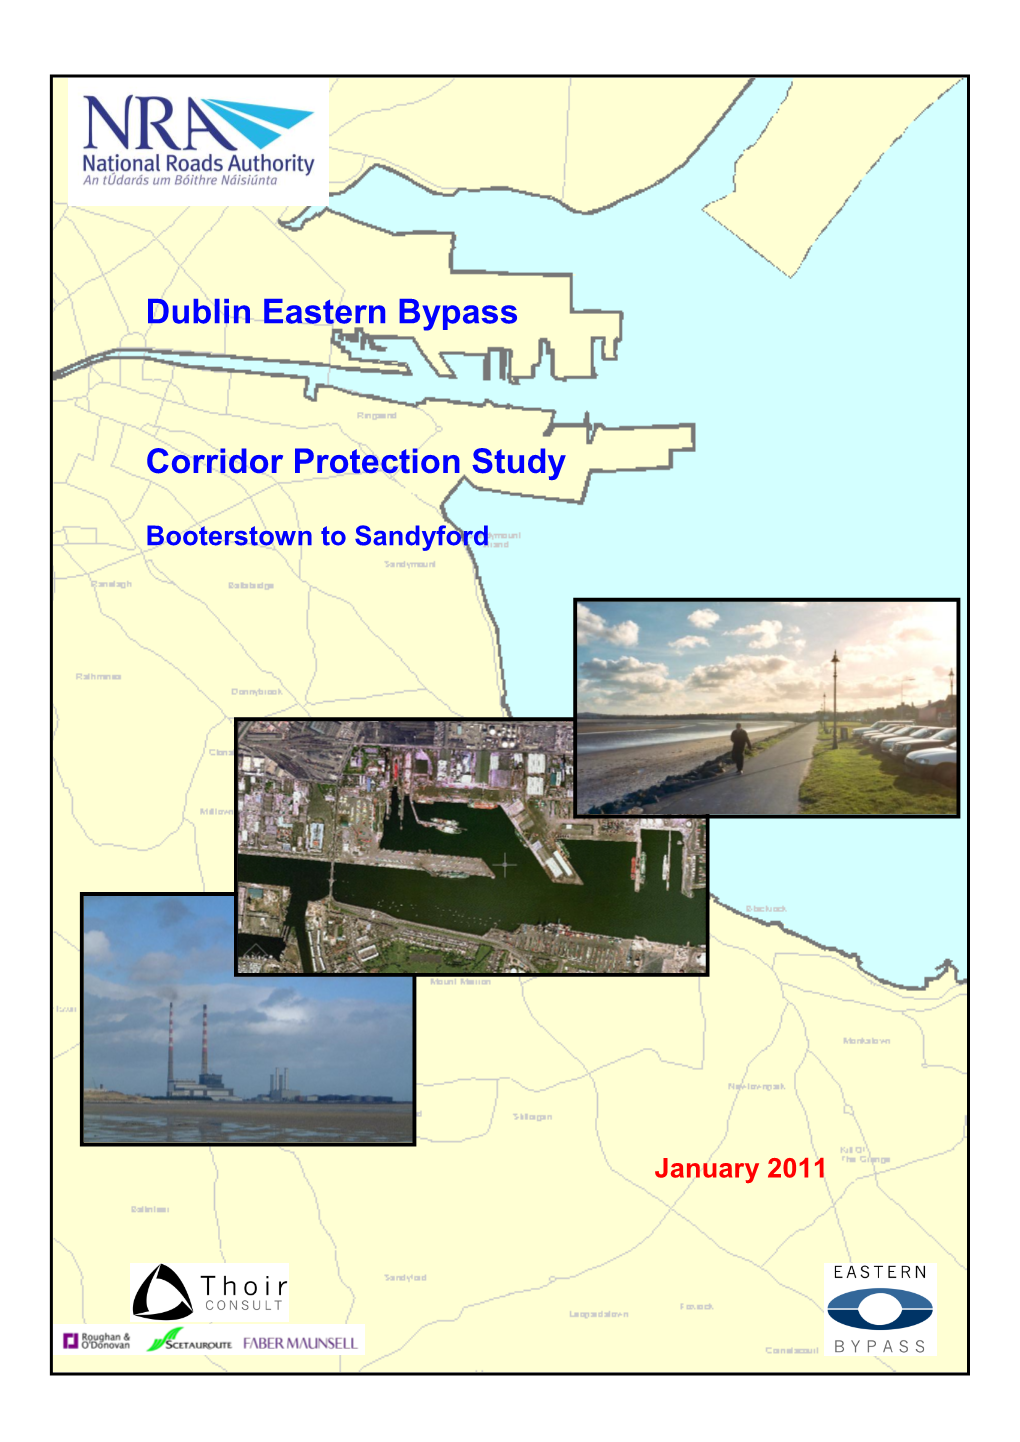 Dublin Eastern Bypass Corridor Protection Study Consulting Engineers Booterstown to Sandyford